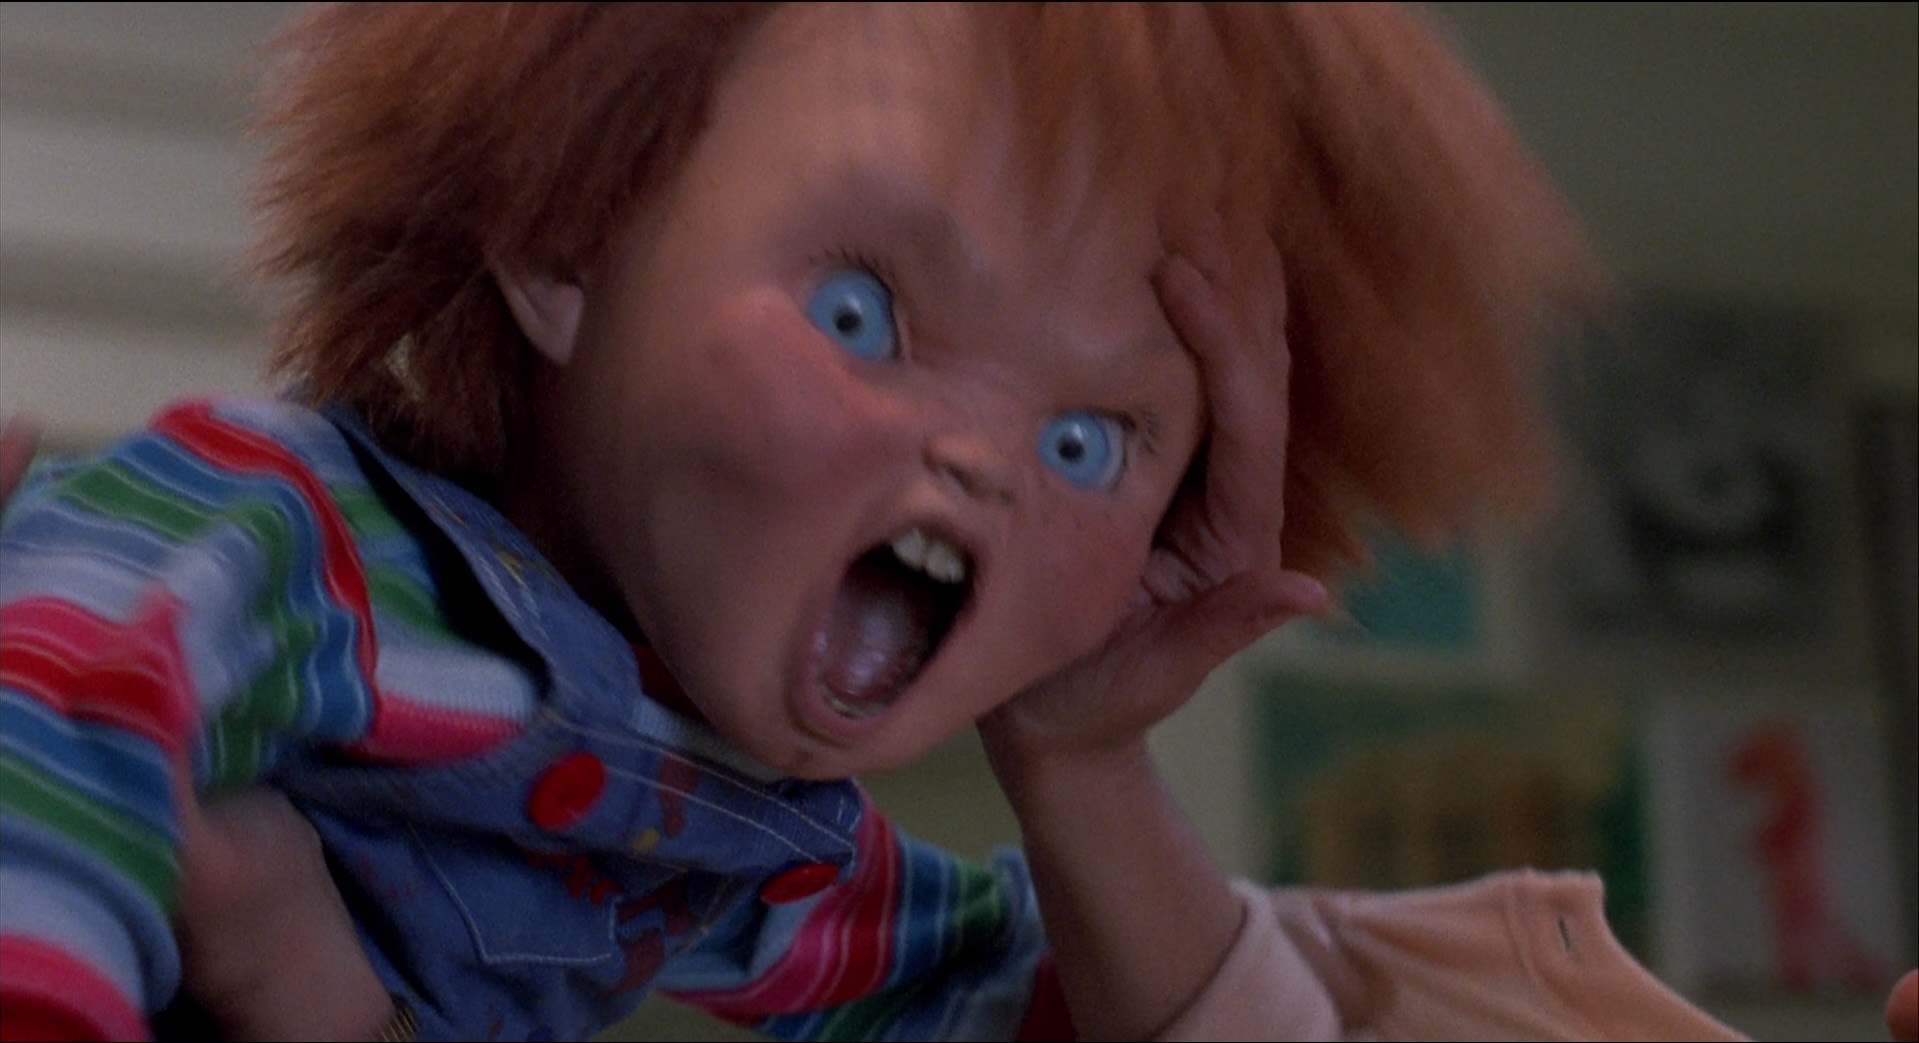 Nice Images Collection: Child's Play Desktop Wallpapers